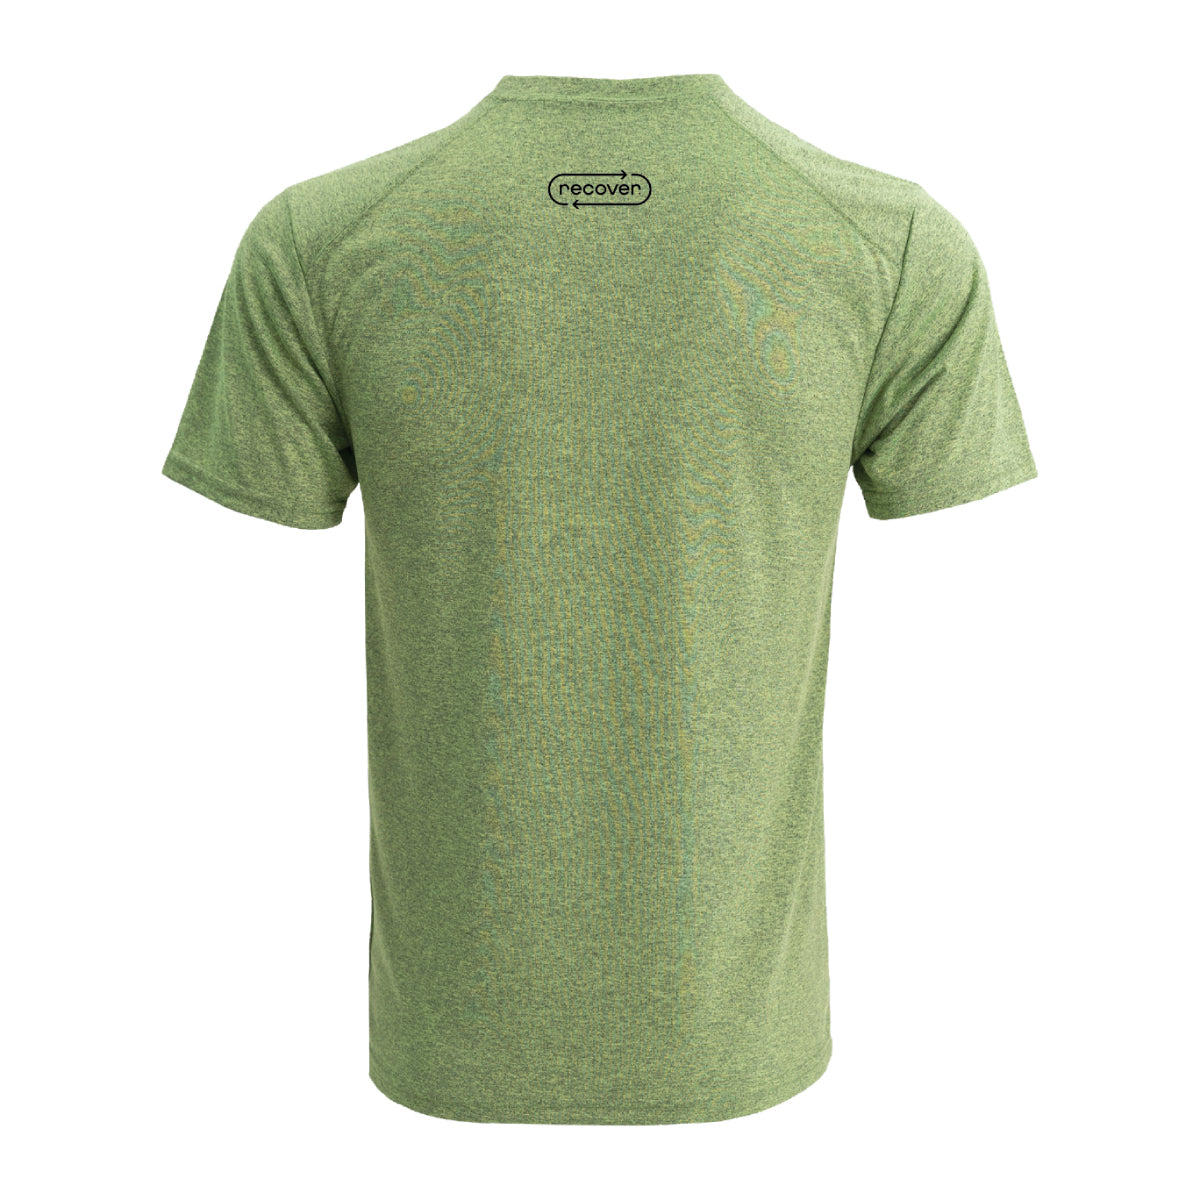 Sustainable Athletic Shirt, Eco-Friendly Sportwear